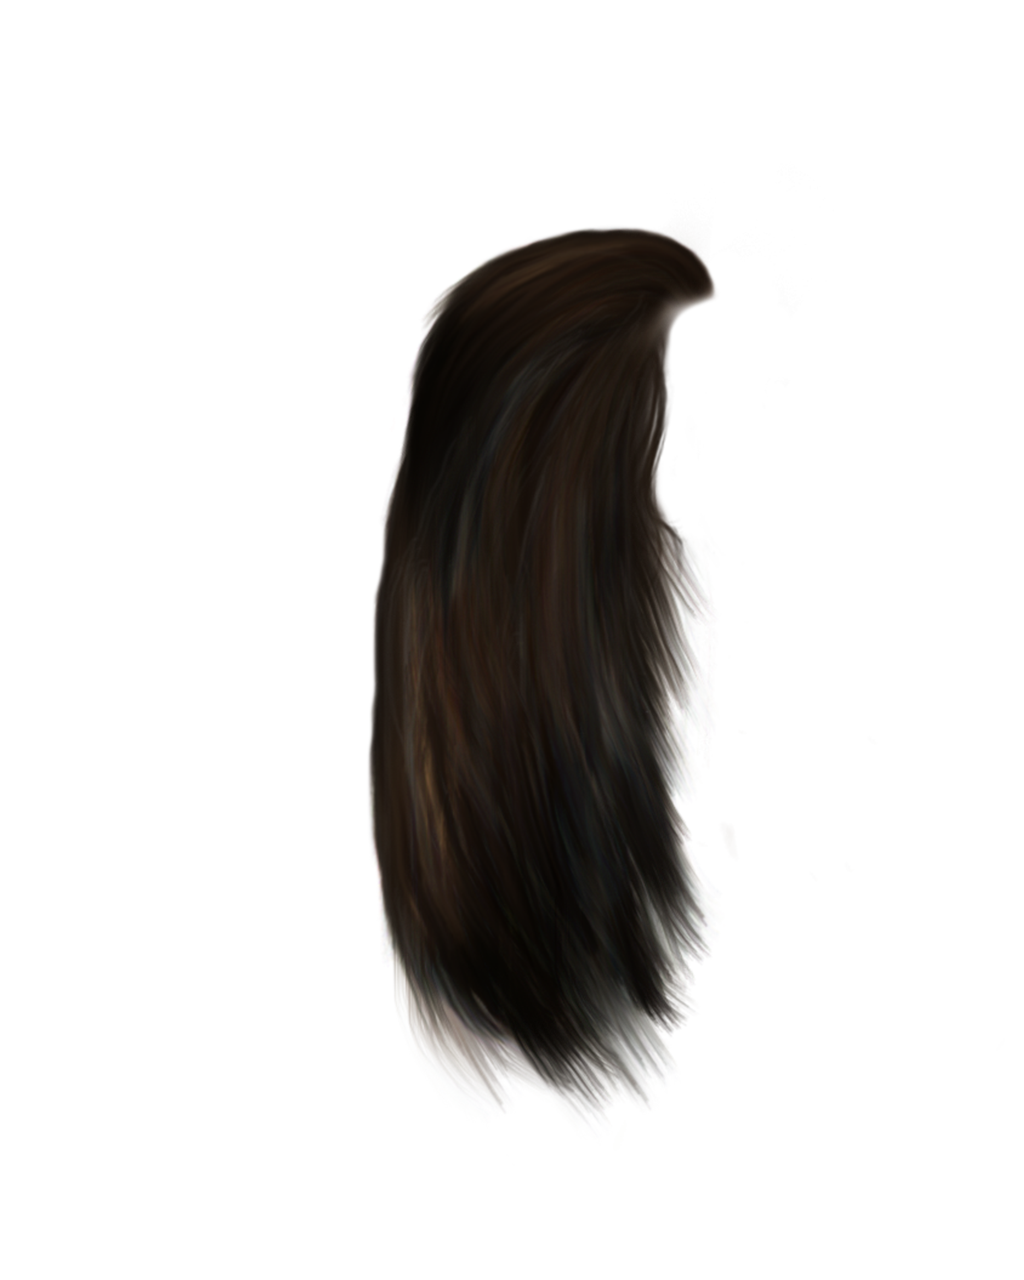 Hairstyles Png Hd PNG Image